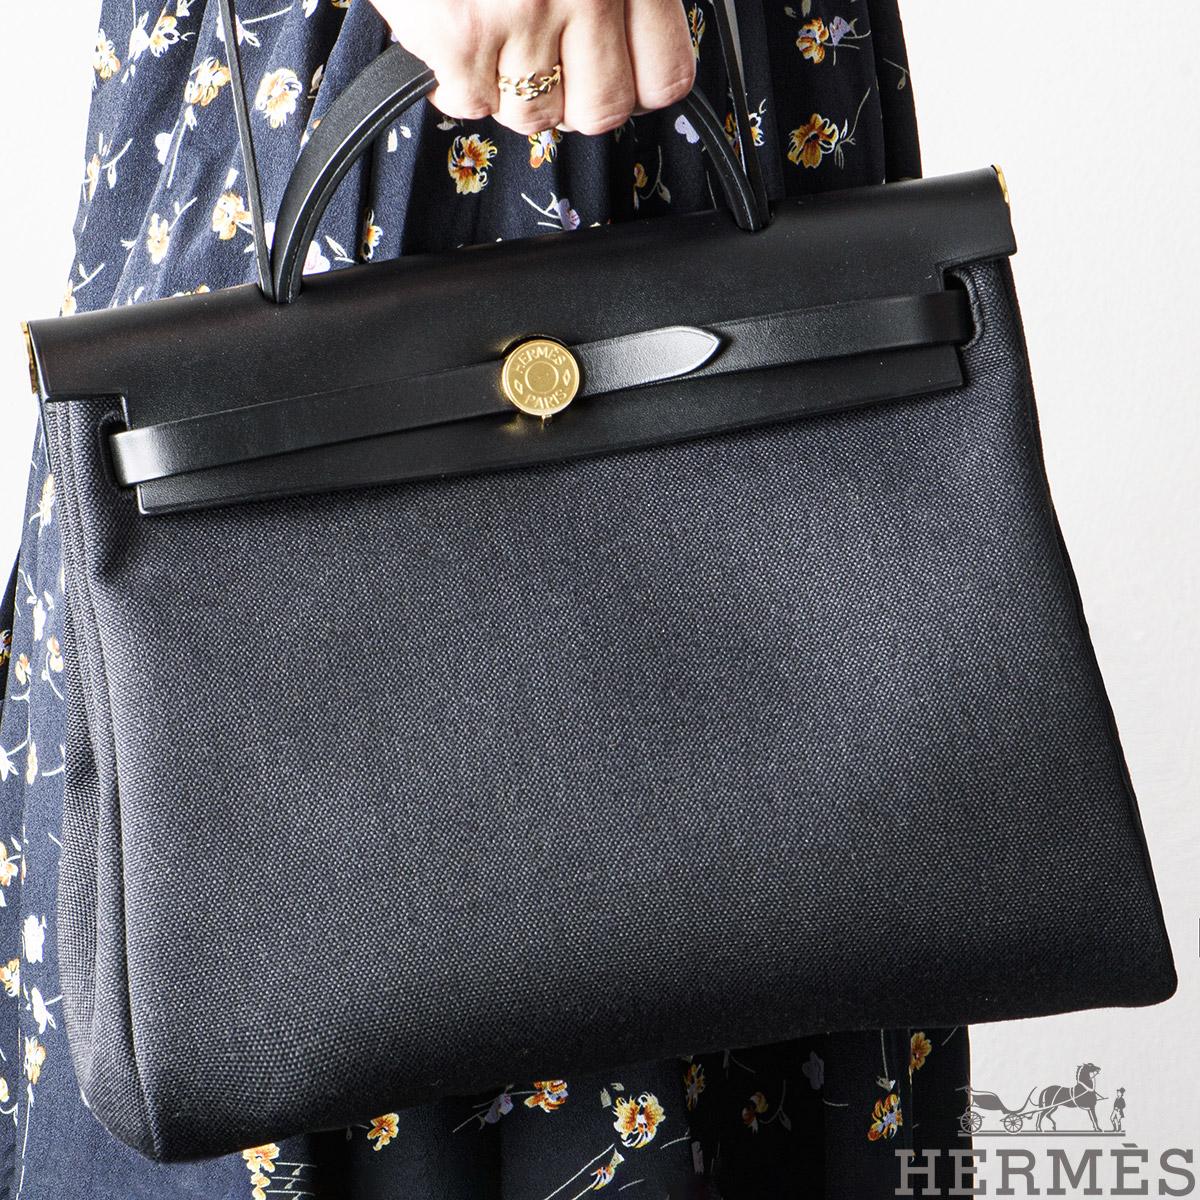 A chic Hermes Herbag Zip 31 handbag. The exterior of this Herbag features a top handle with a crossbody strap in Noir Vache Hunter leather on the top section whereas the body of the bag is made out of Noir Toile Militaire canvas, has a Clou de Selle